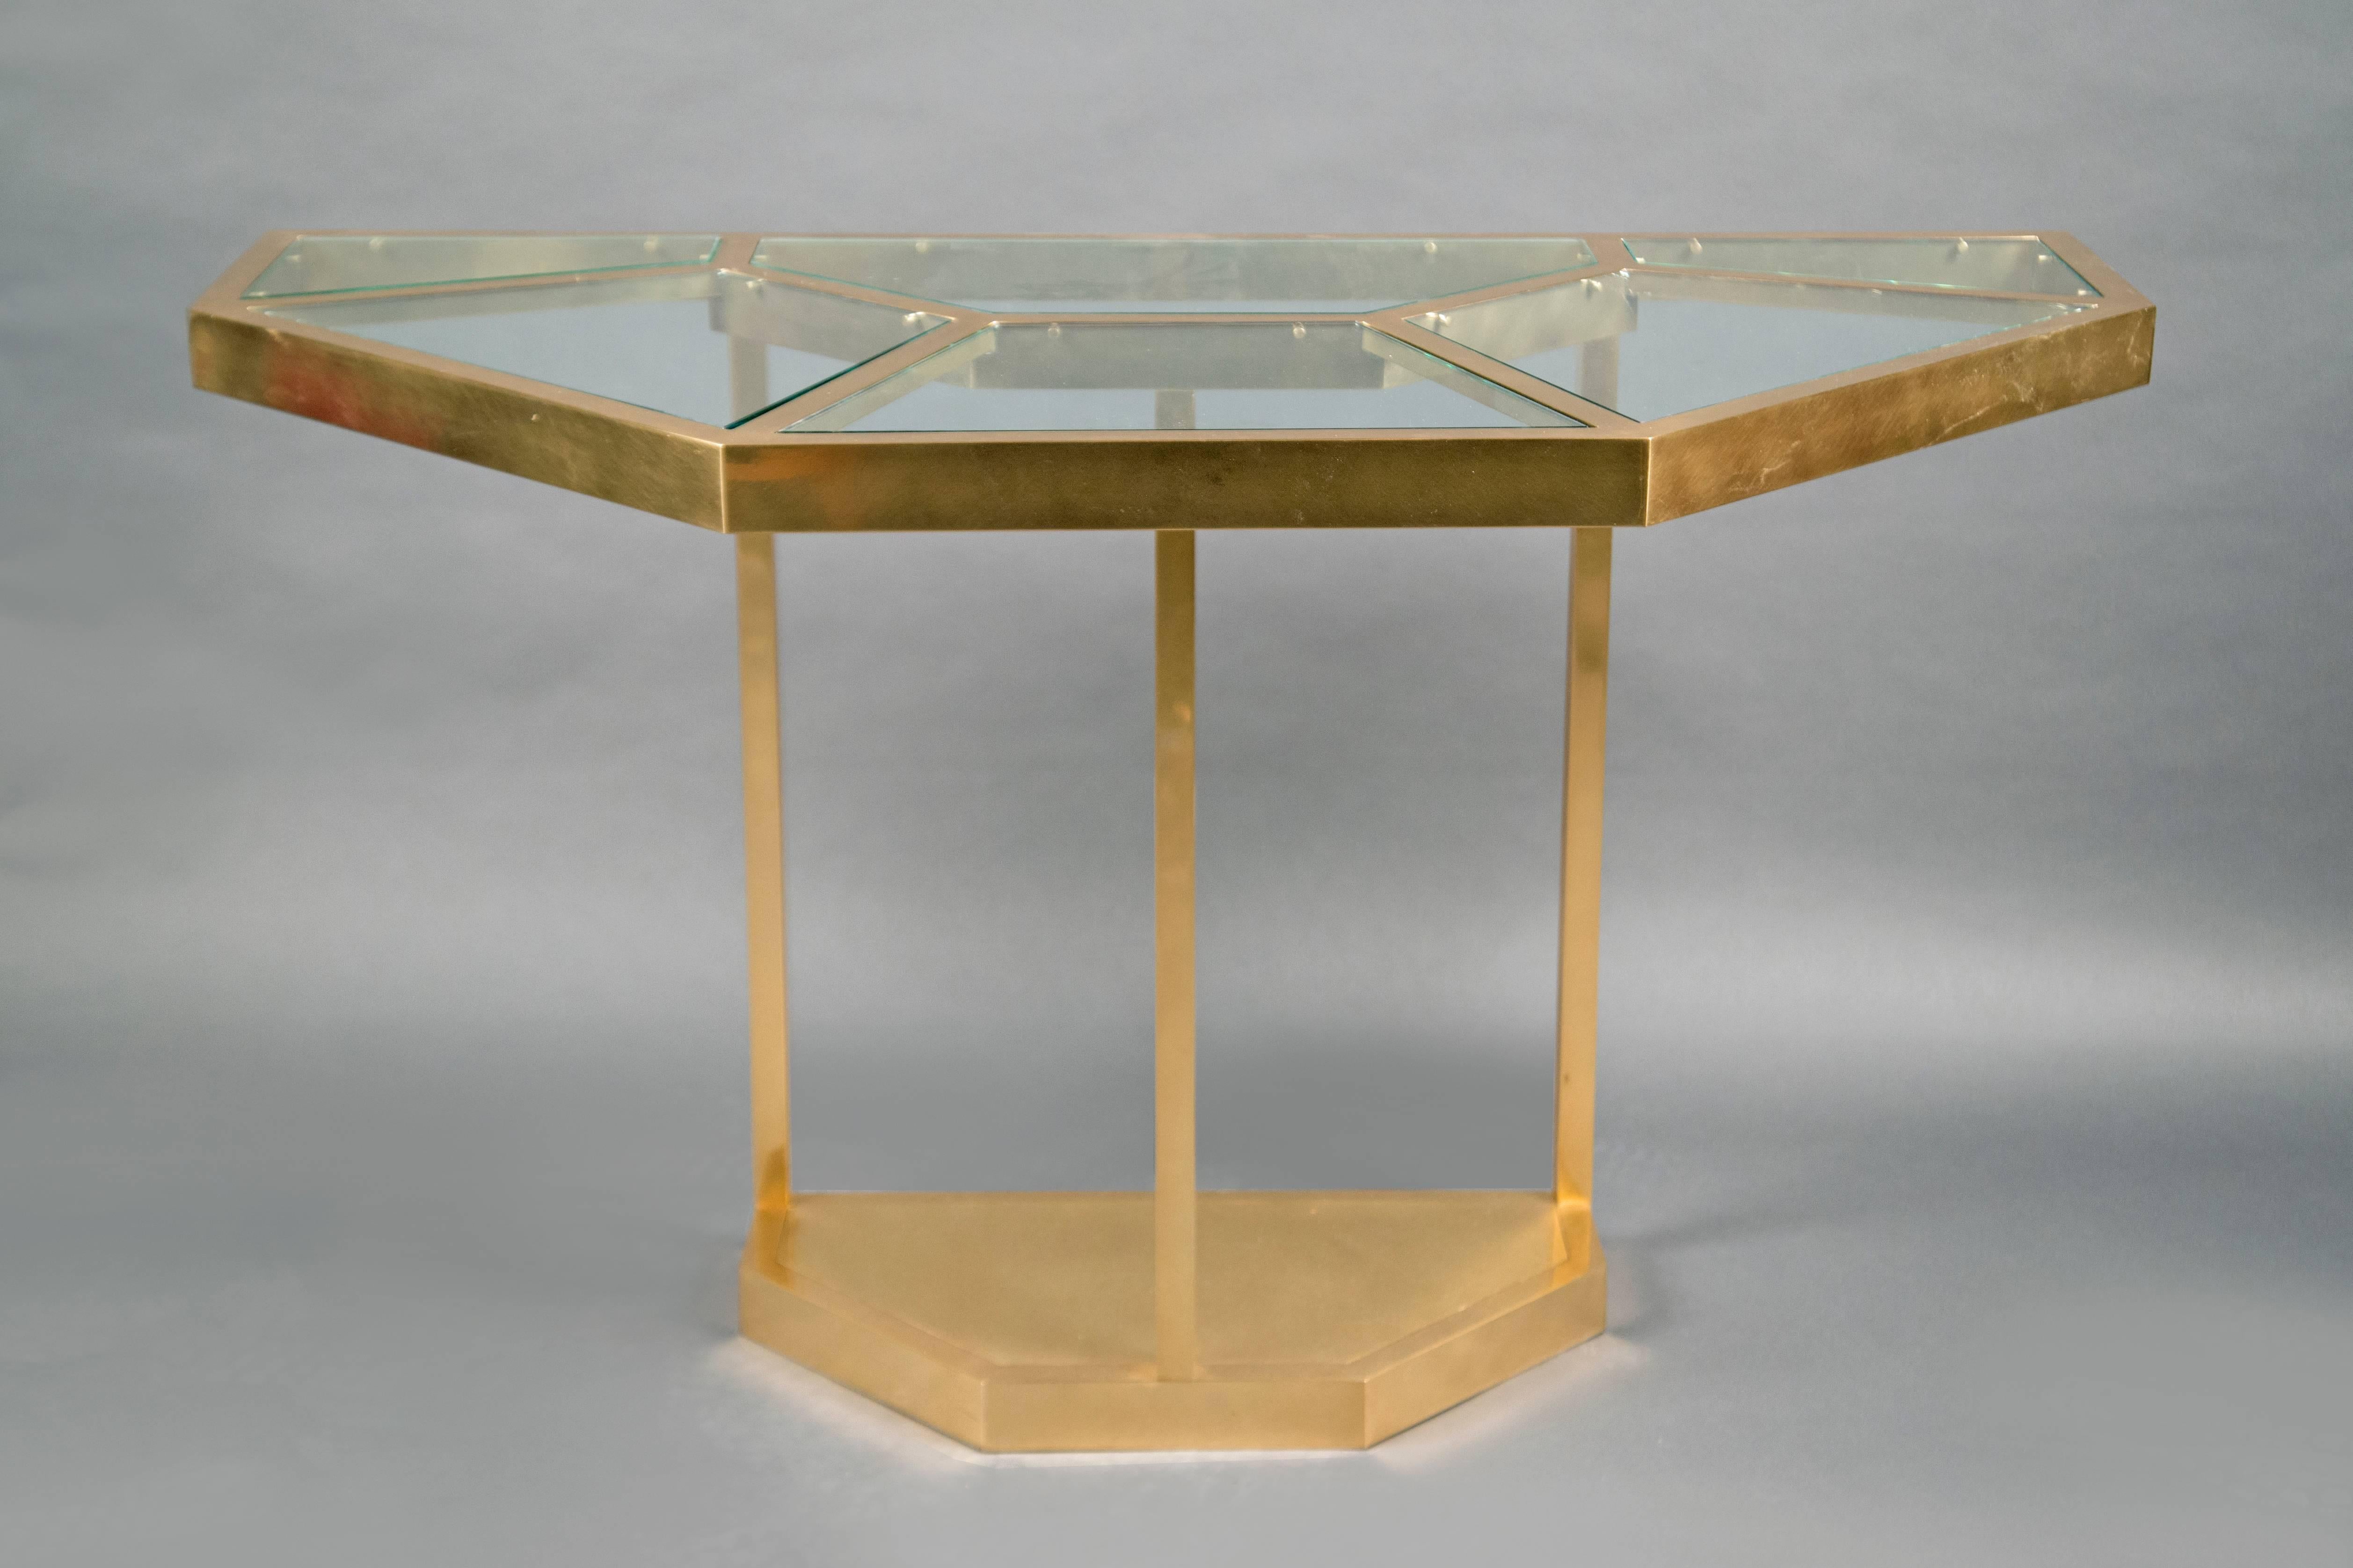 Hexagonal brass structure, the top inlaid with clear glass pieces. The table can be separated in two halves and be used as consoles. Model “Puzzle” from the Series Plurimi. 